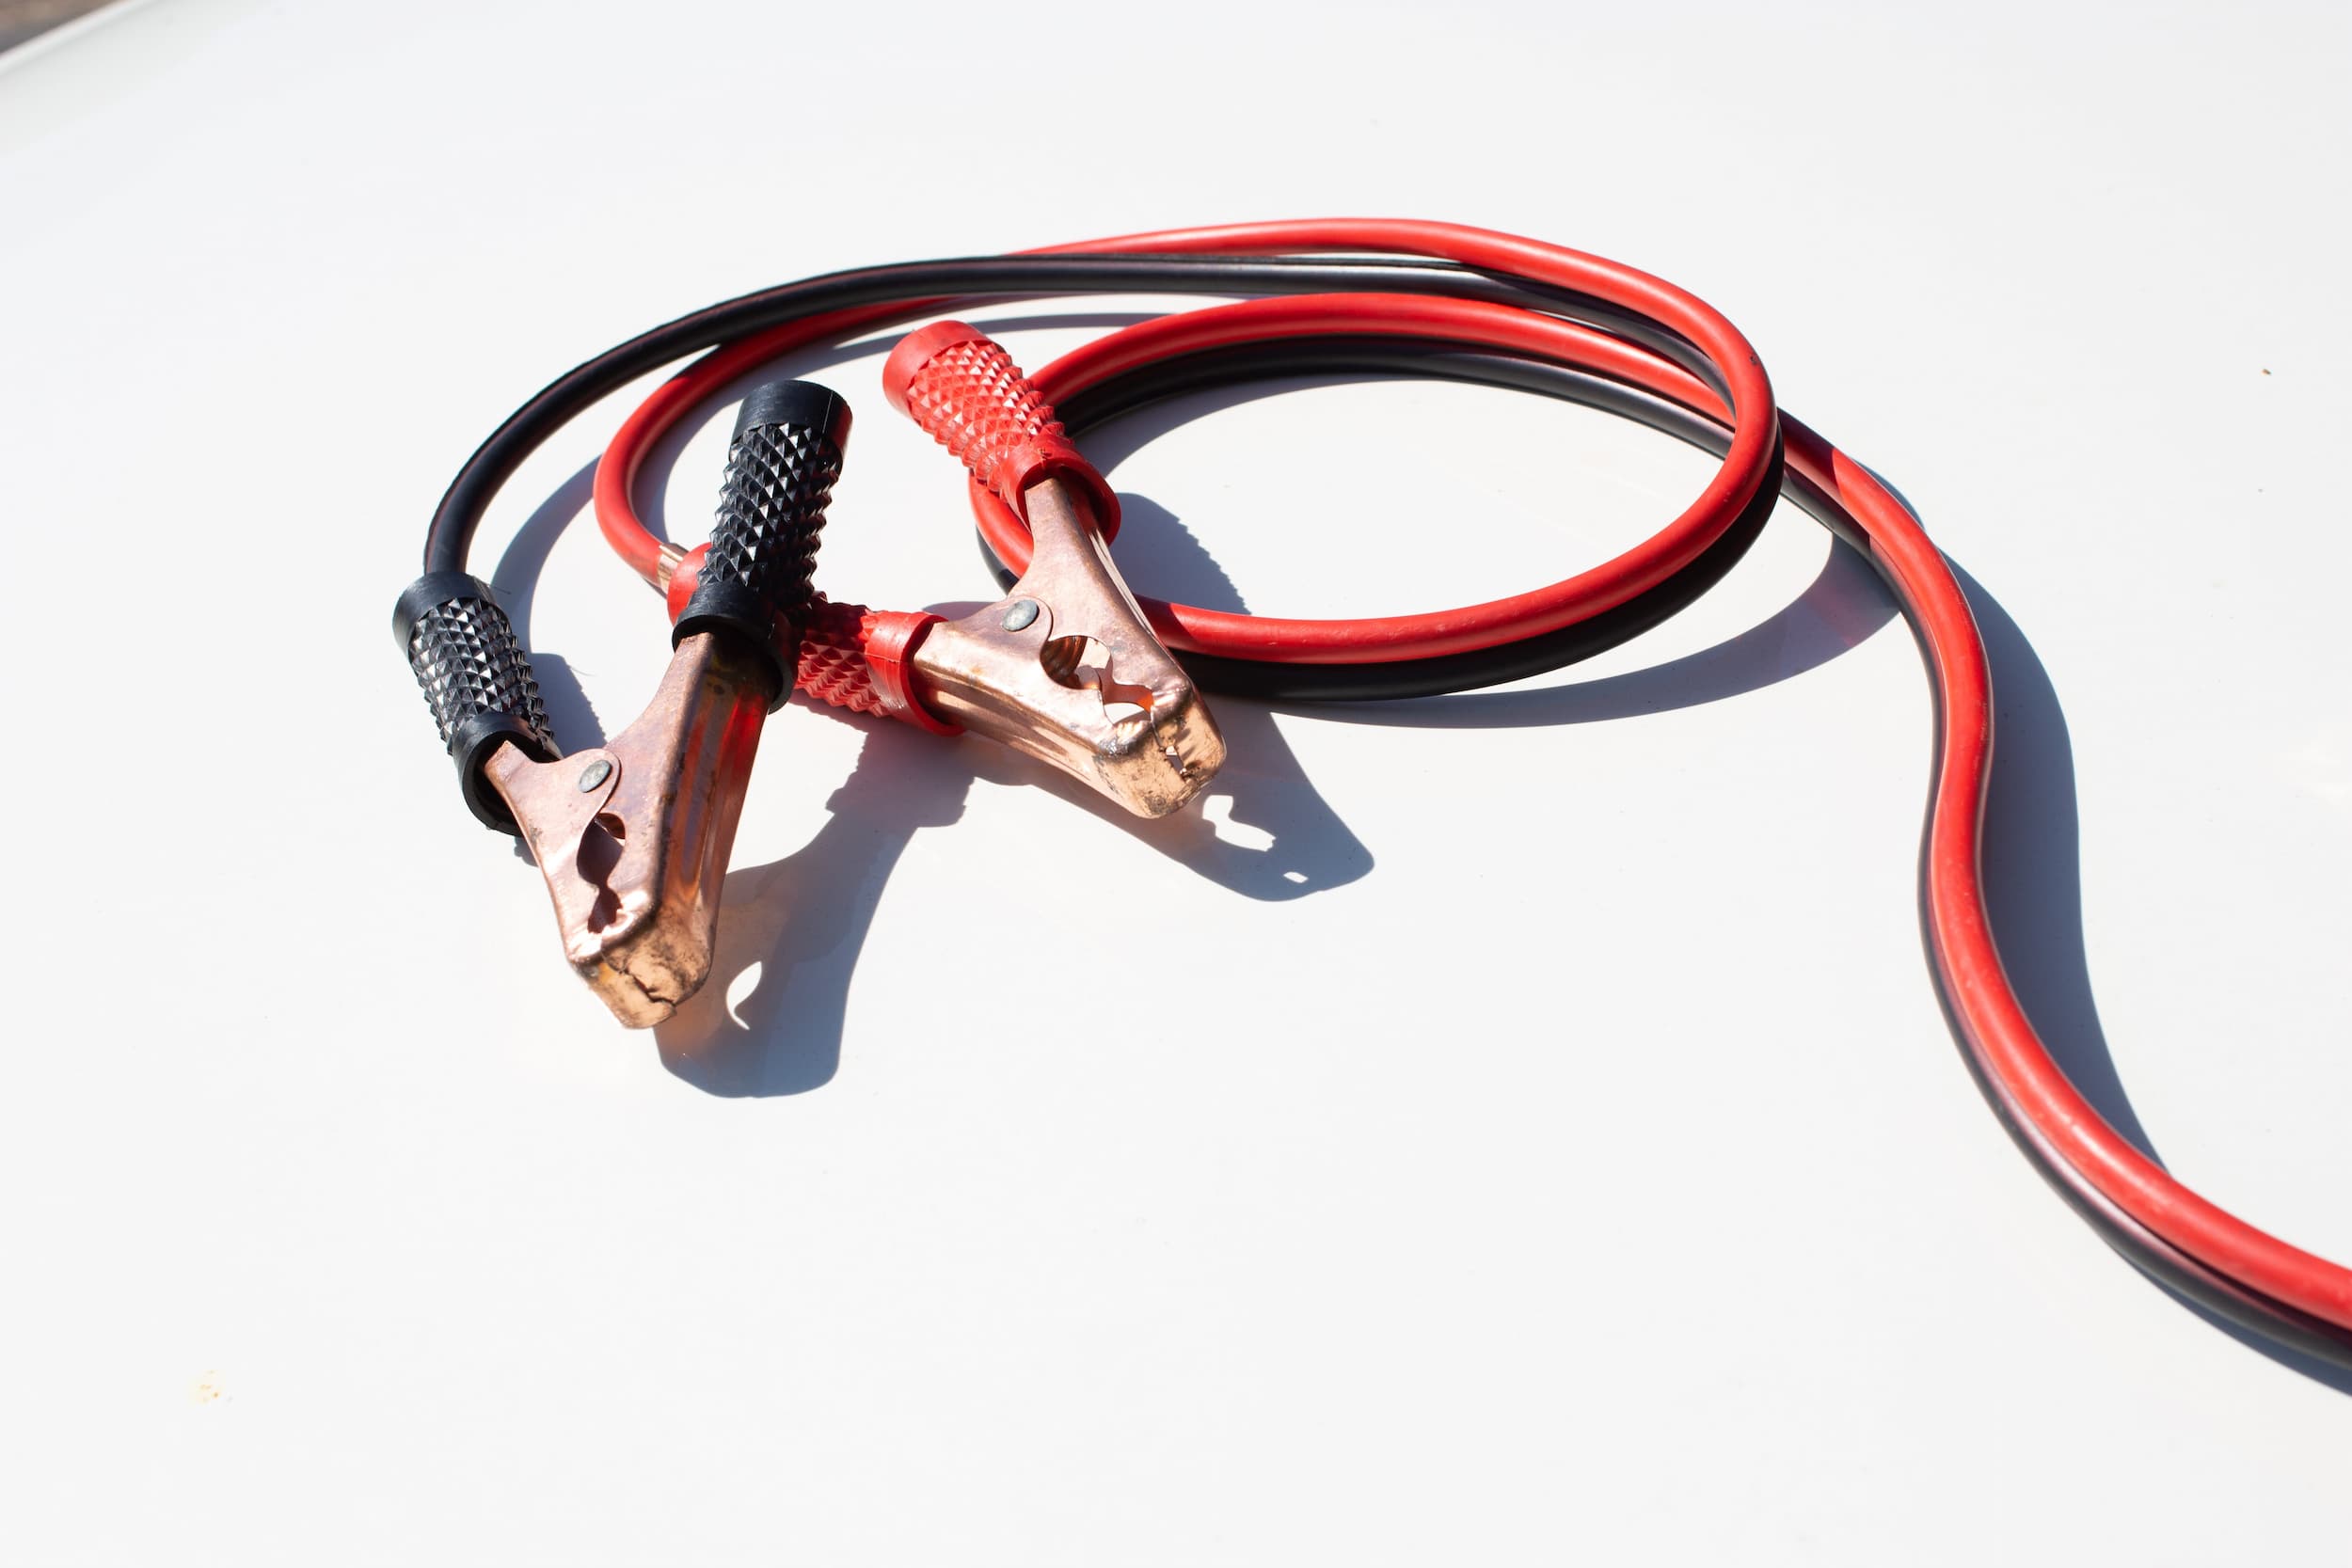 Jump start cables